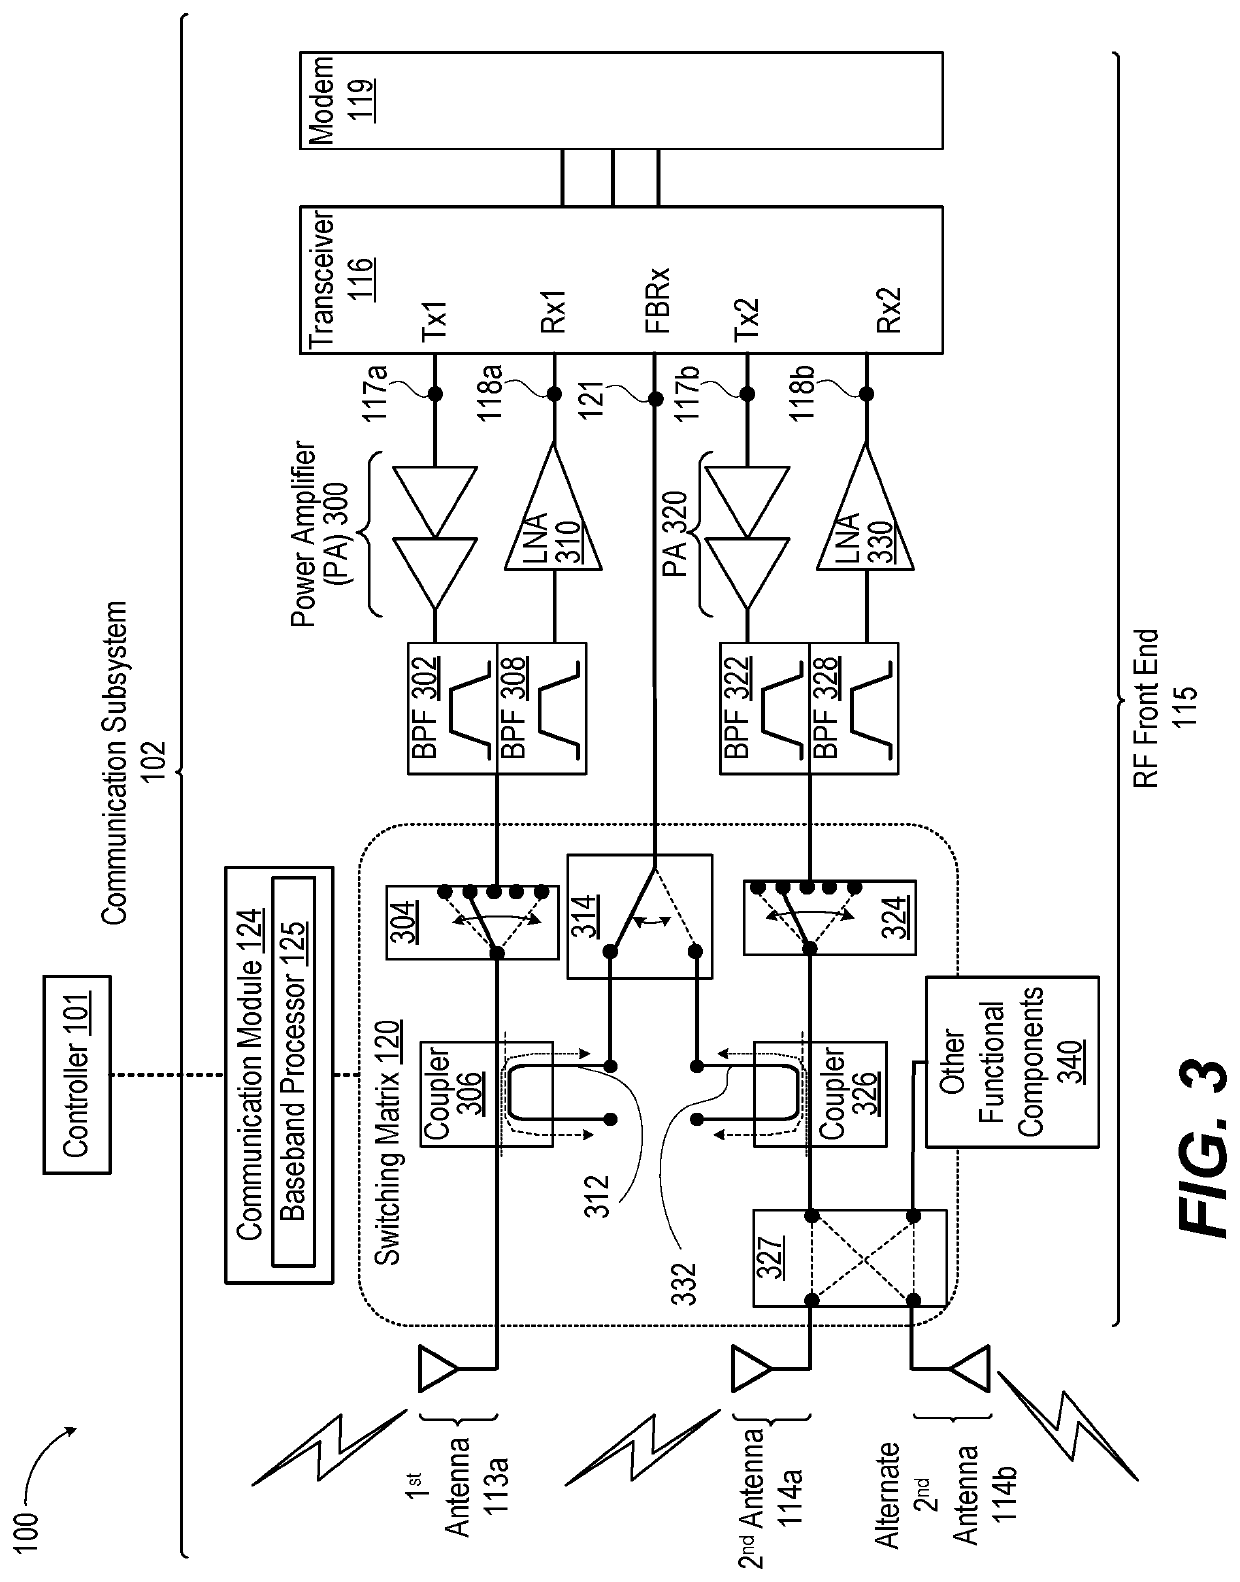 Method for antenna selection for concurrent independent transmissions via multiple antennas